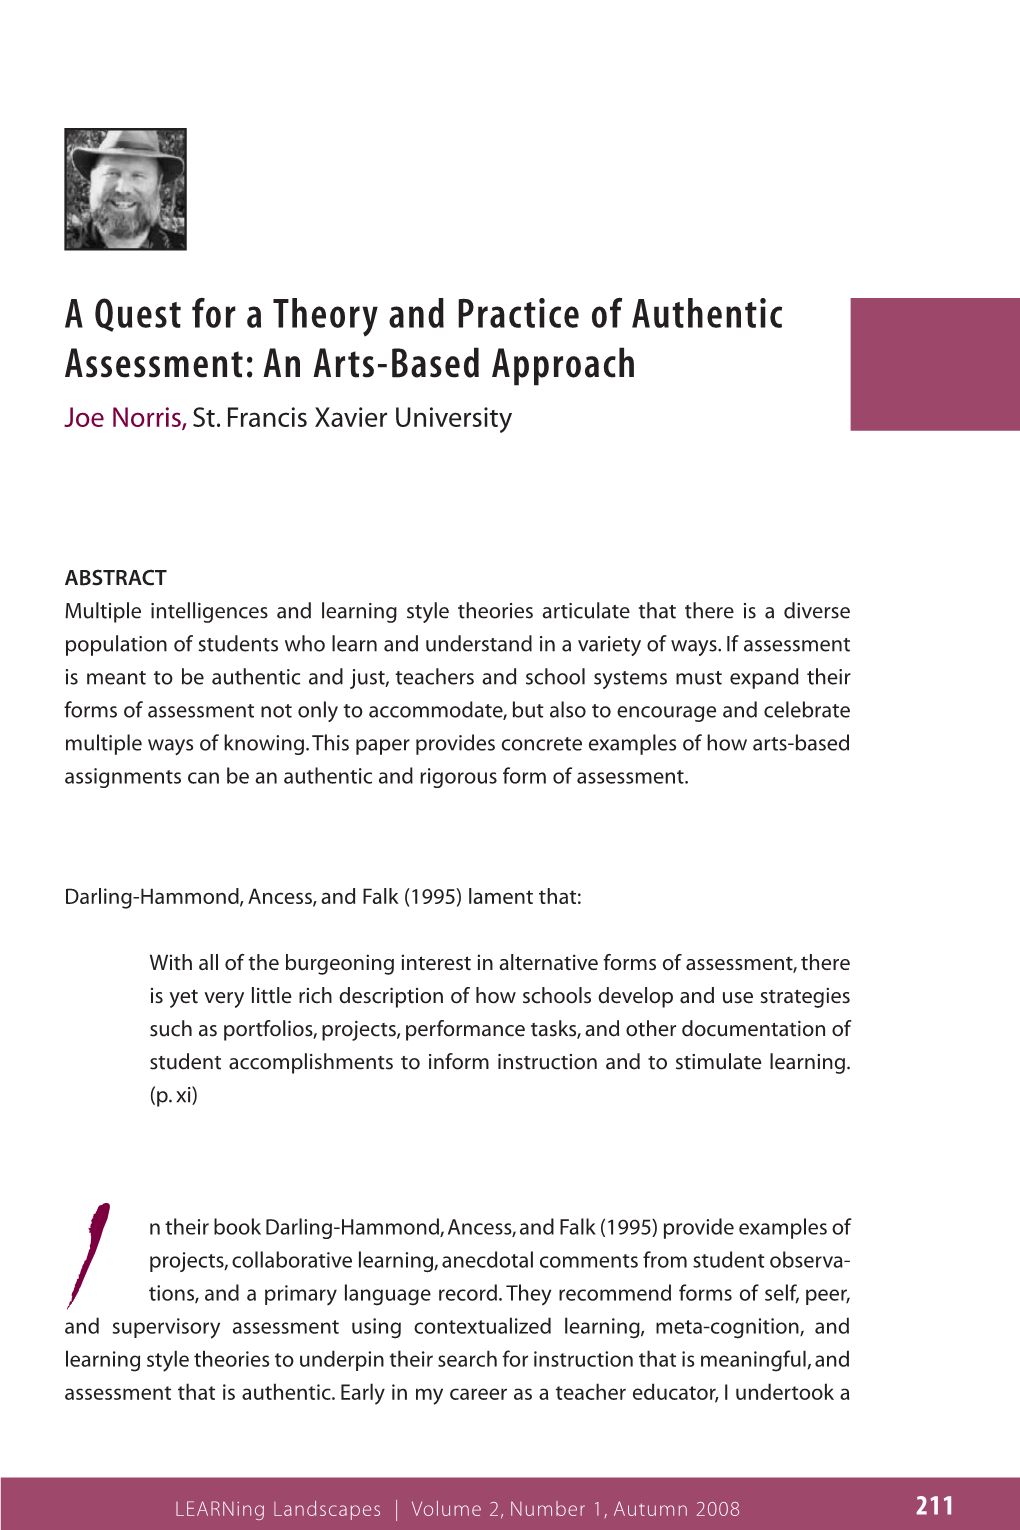 A Quest for a Theory and Practice of Authentic Assessment: an Arts-Based Approach Joe Norris, St